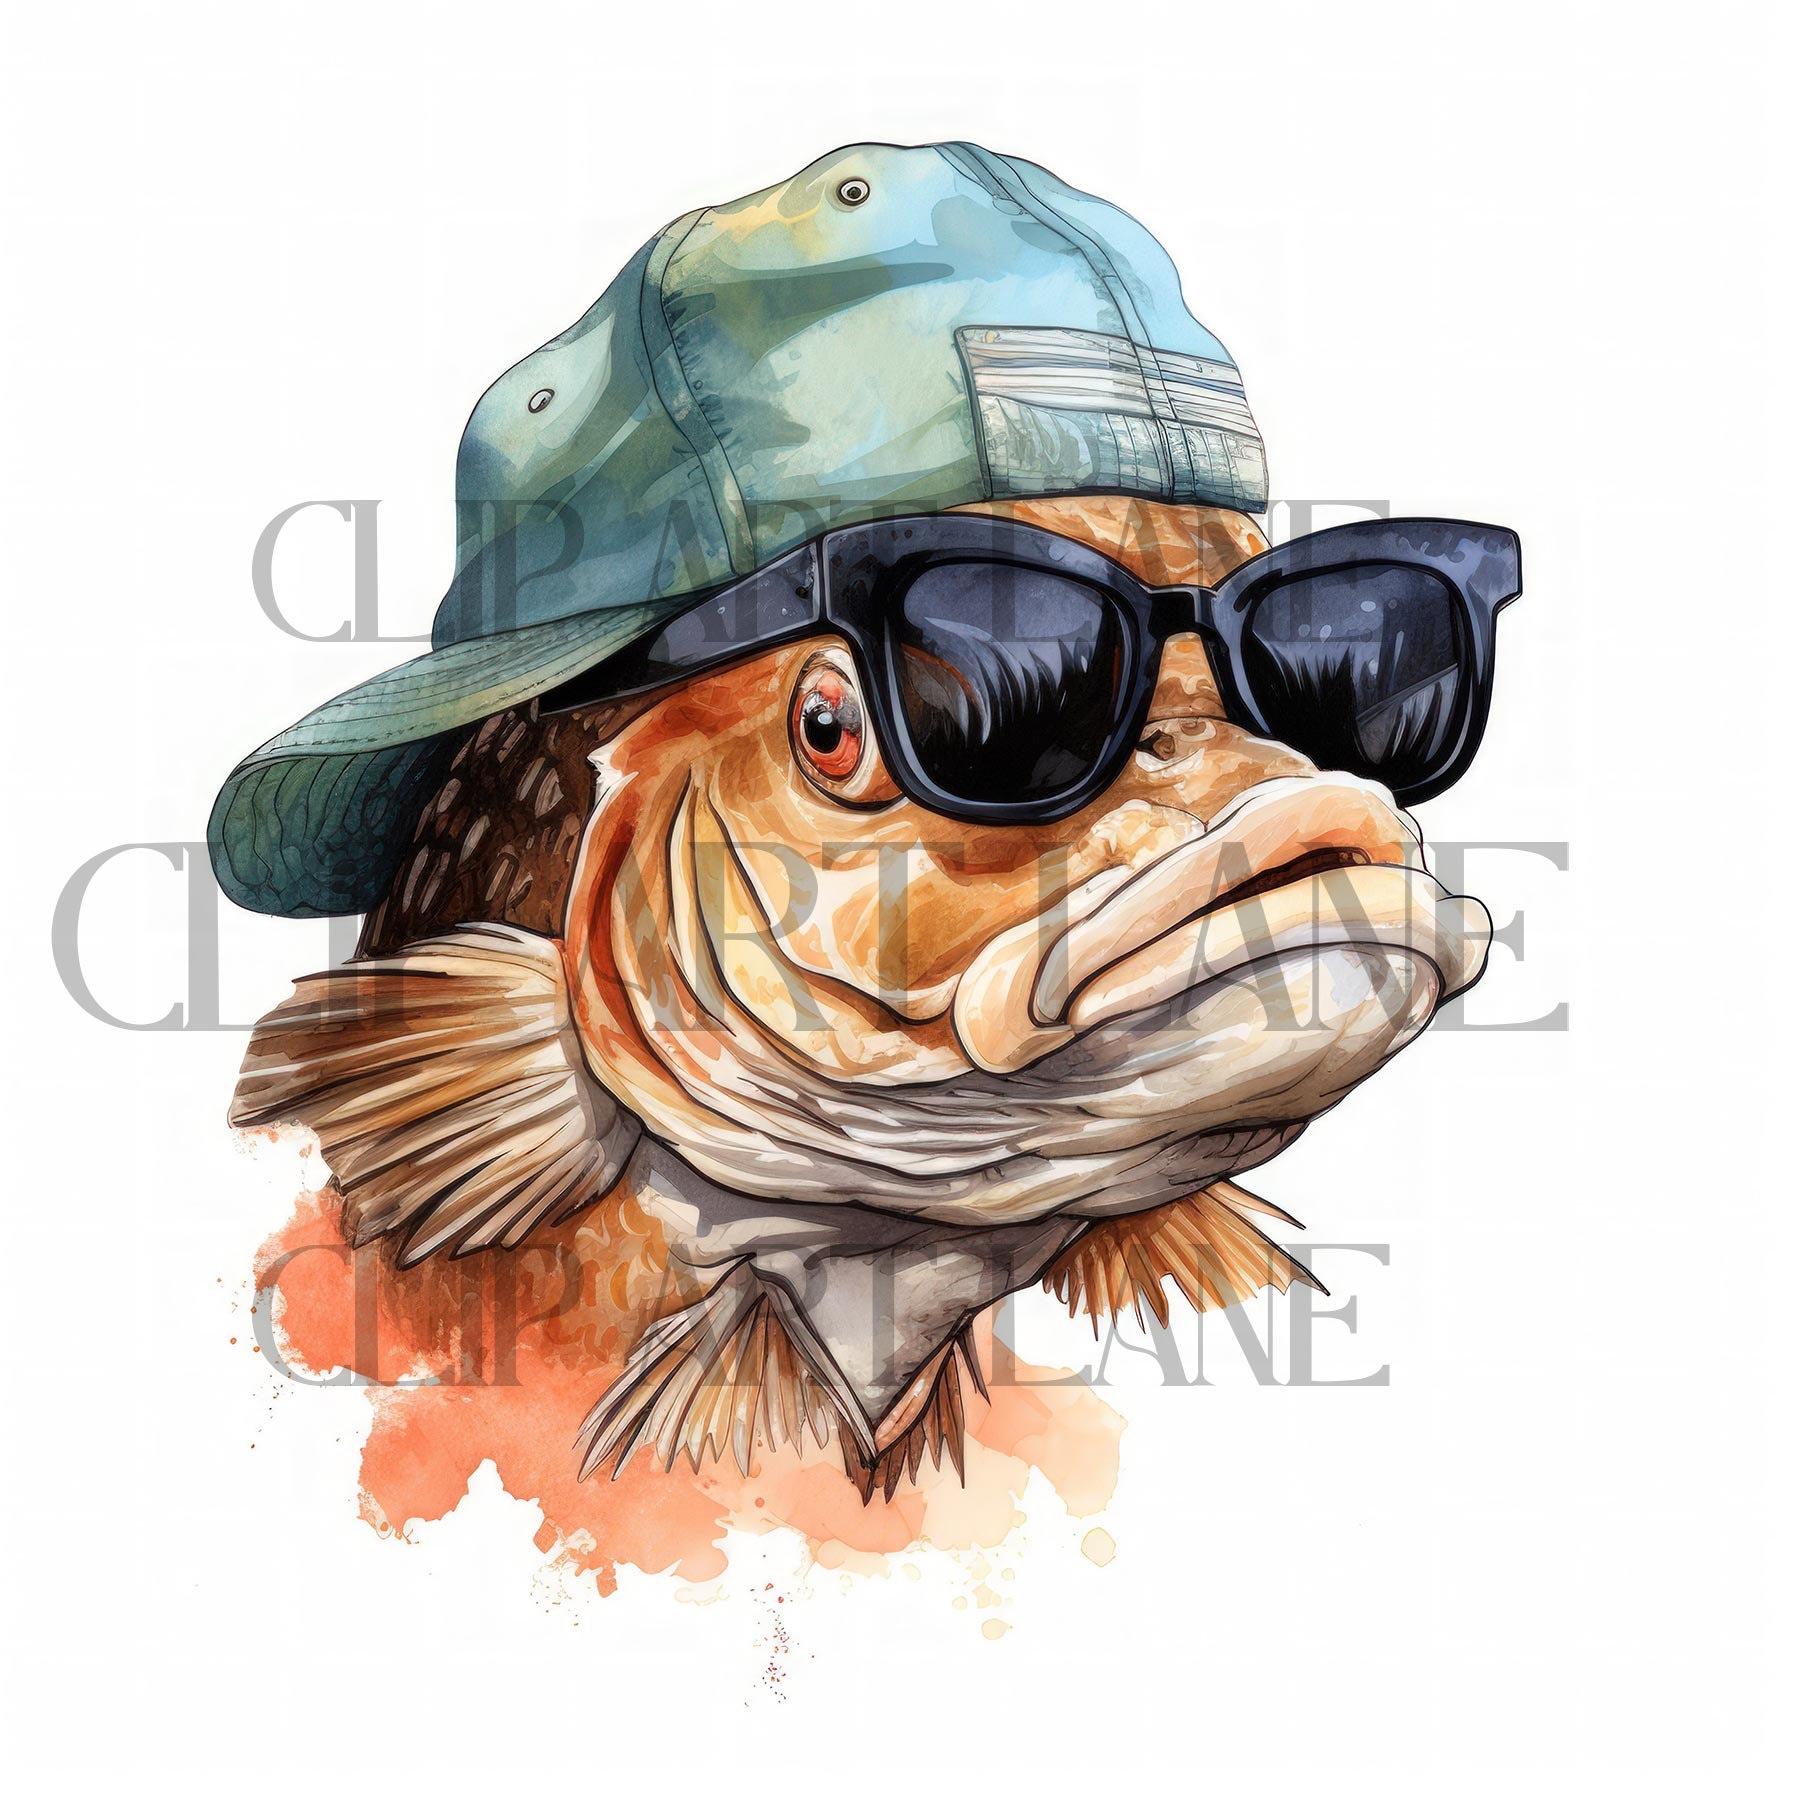 Bass Fish Clipart Funny 15 High Quality Jpgs Funny Bass Fish Images  Sunglasses Download Fish Artwork Lake Clipart Paper Craft Hats -  Canada